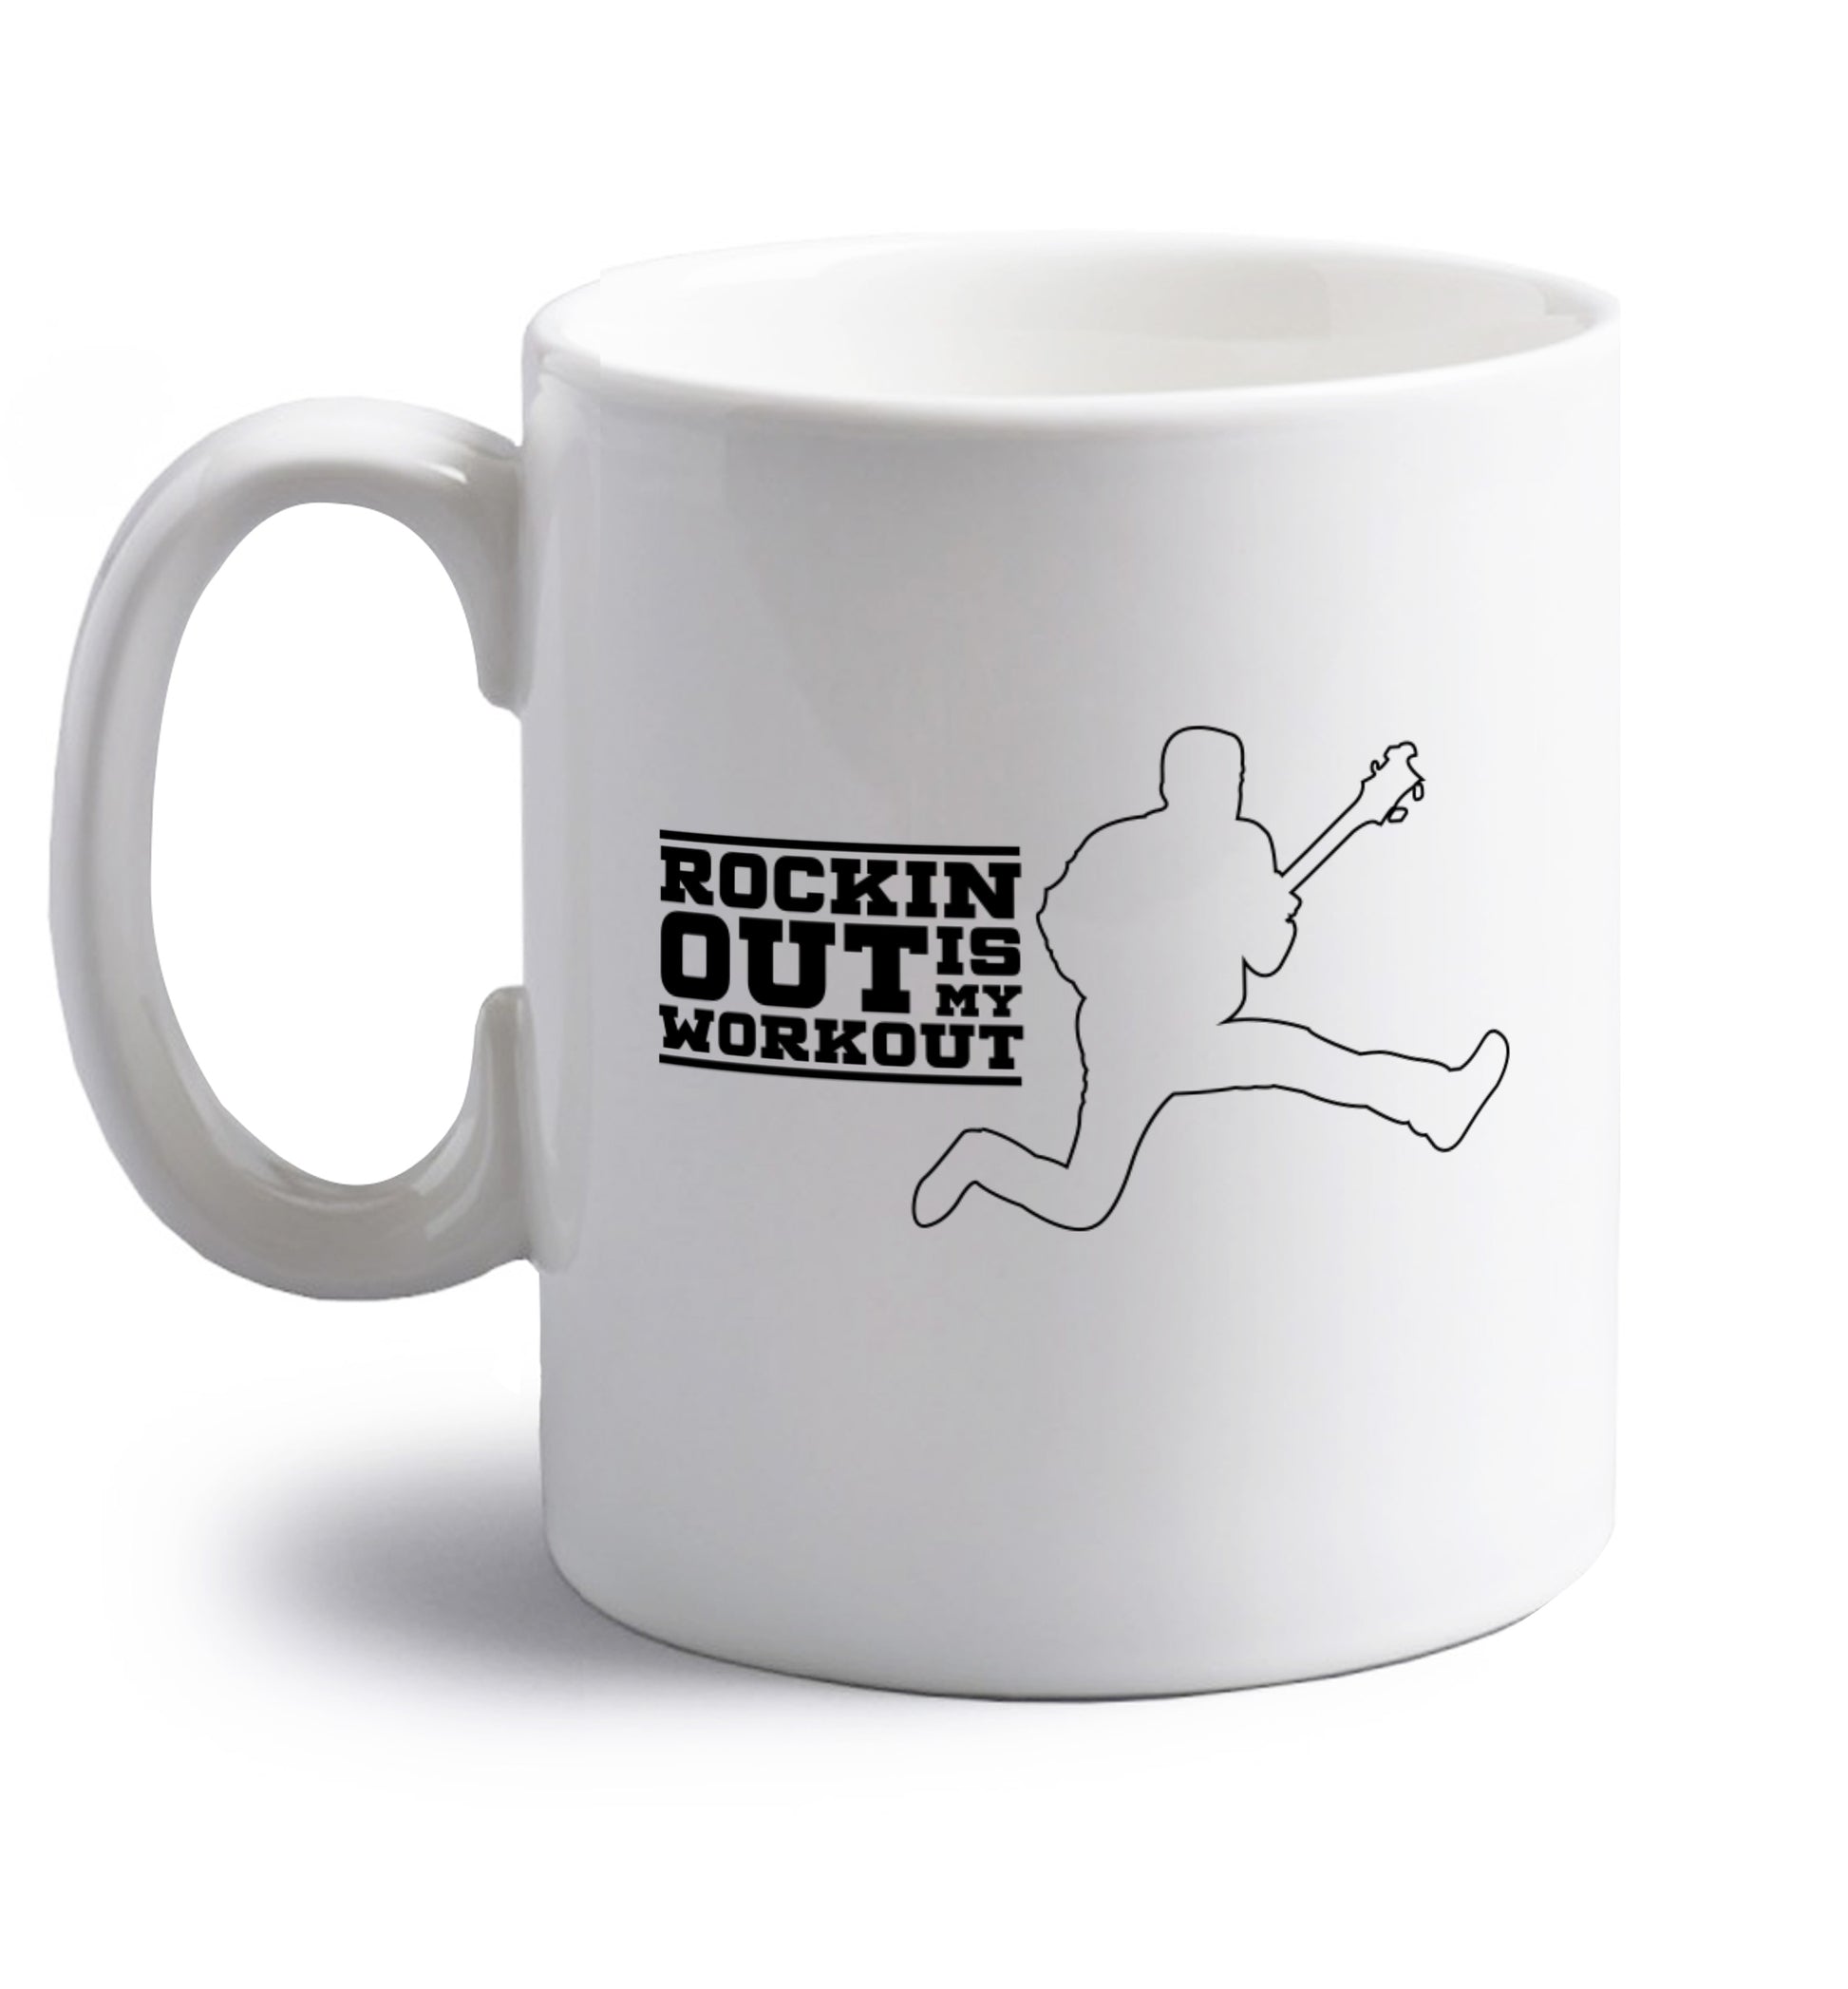 Rockin out is my workout right handed white ceramic mug 